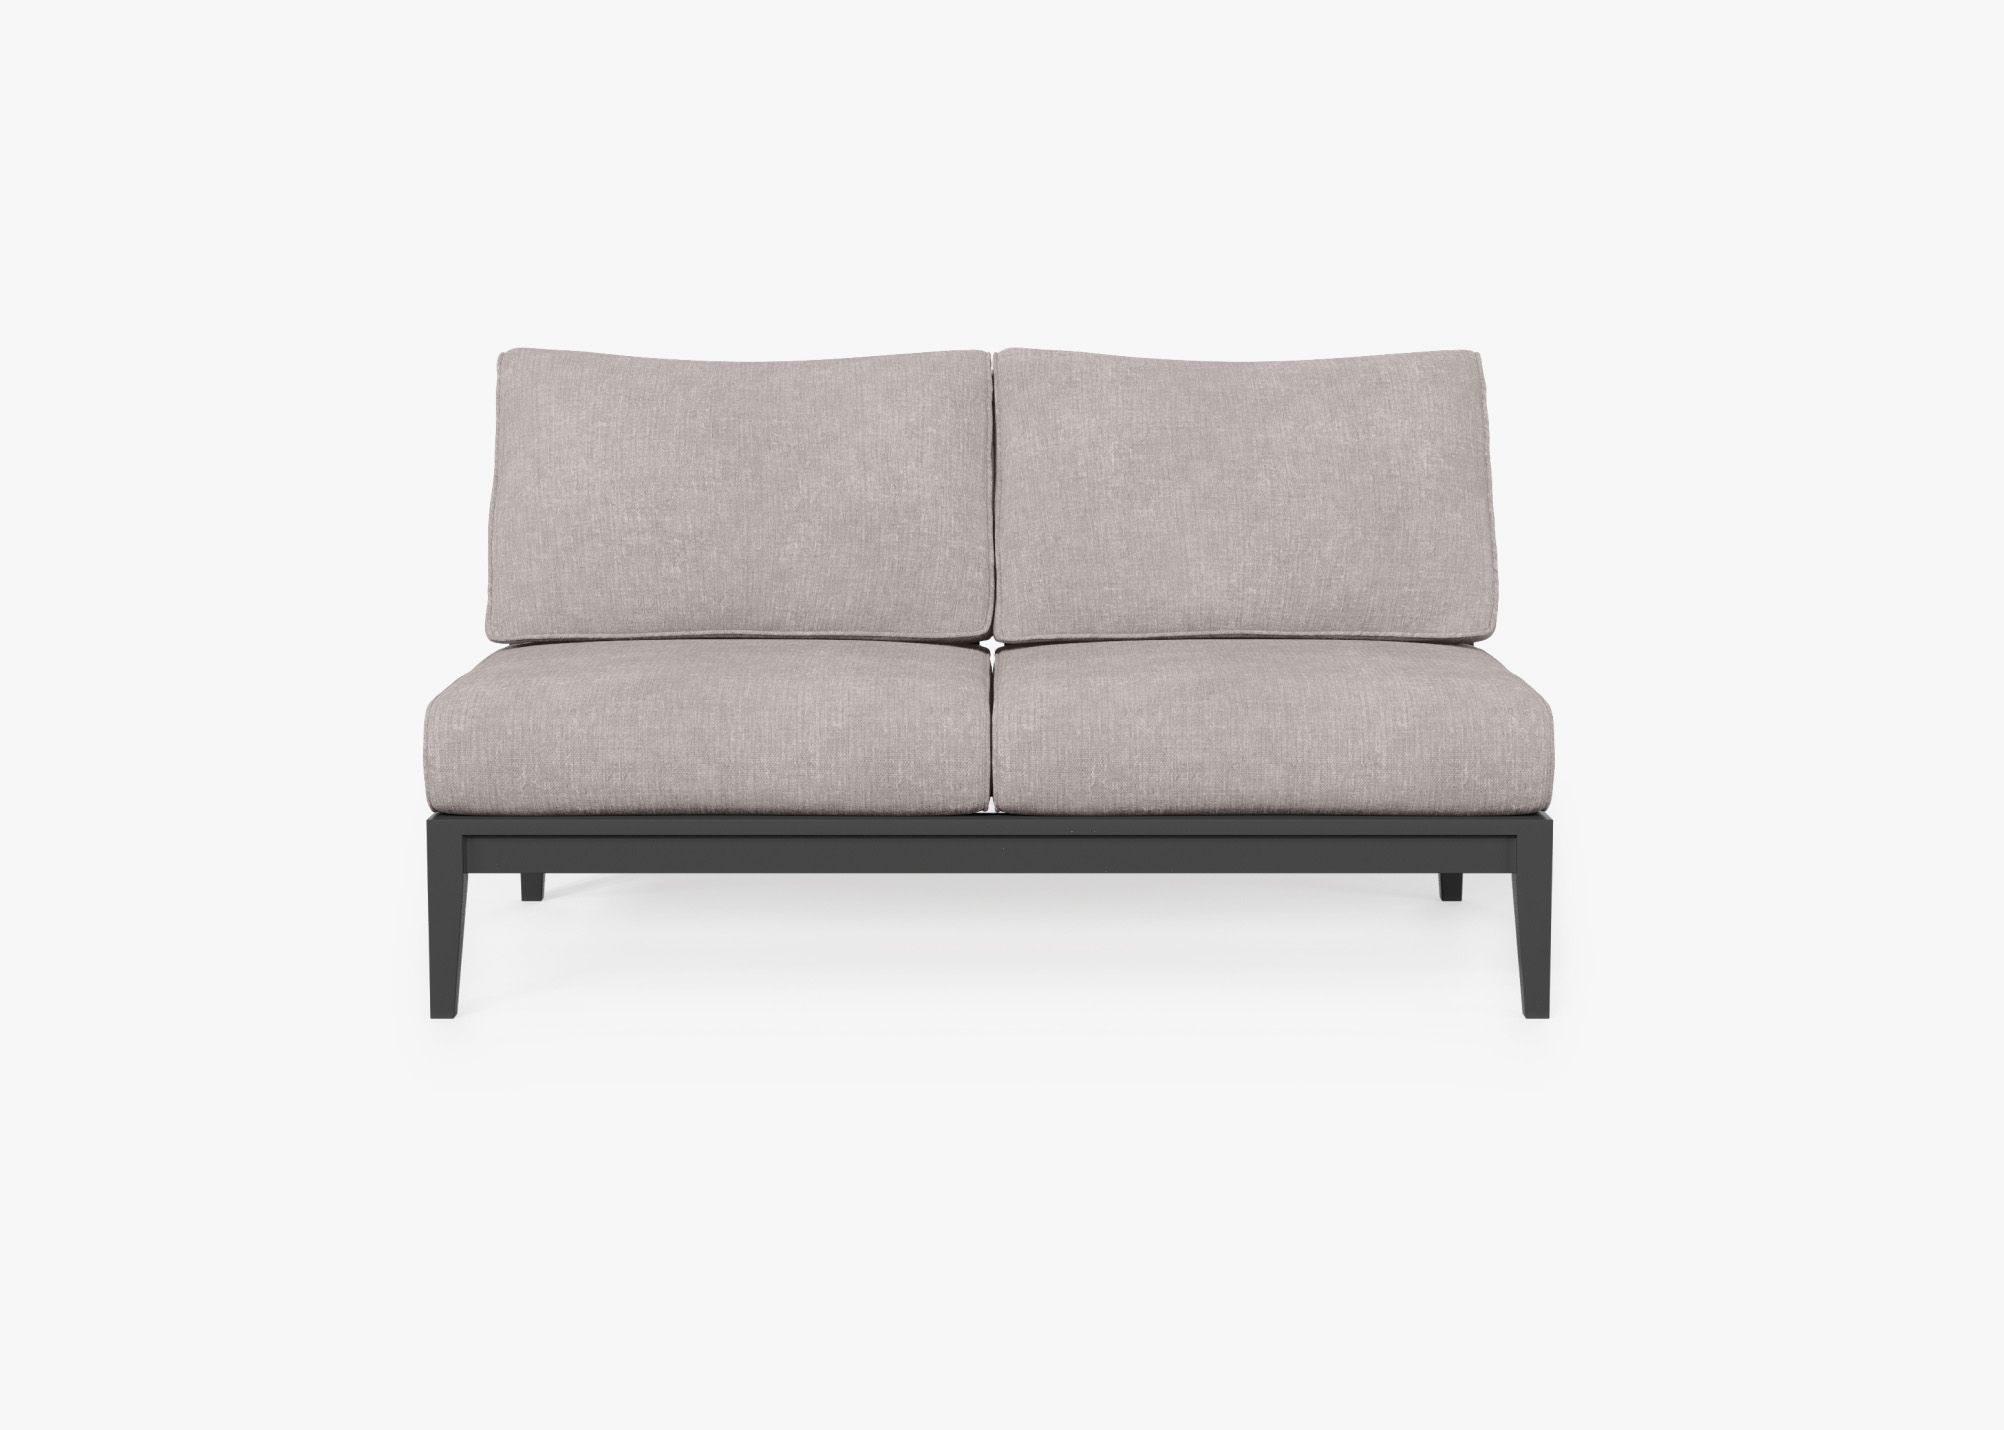 Charcoal Aluminum Outdoor Armless Loveseat, front. Comfortable, durable, and weather resistant outdoor seating with memory foam.